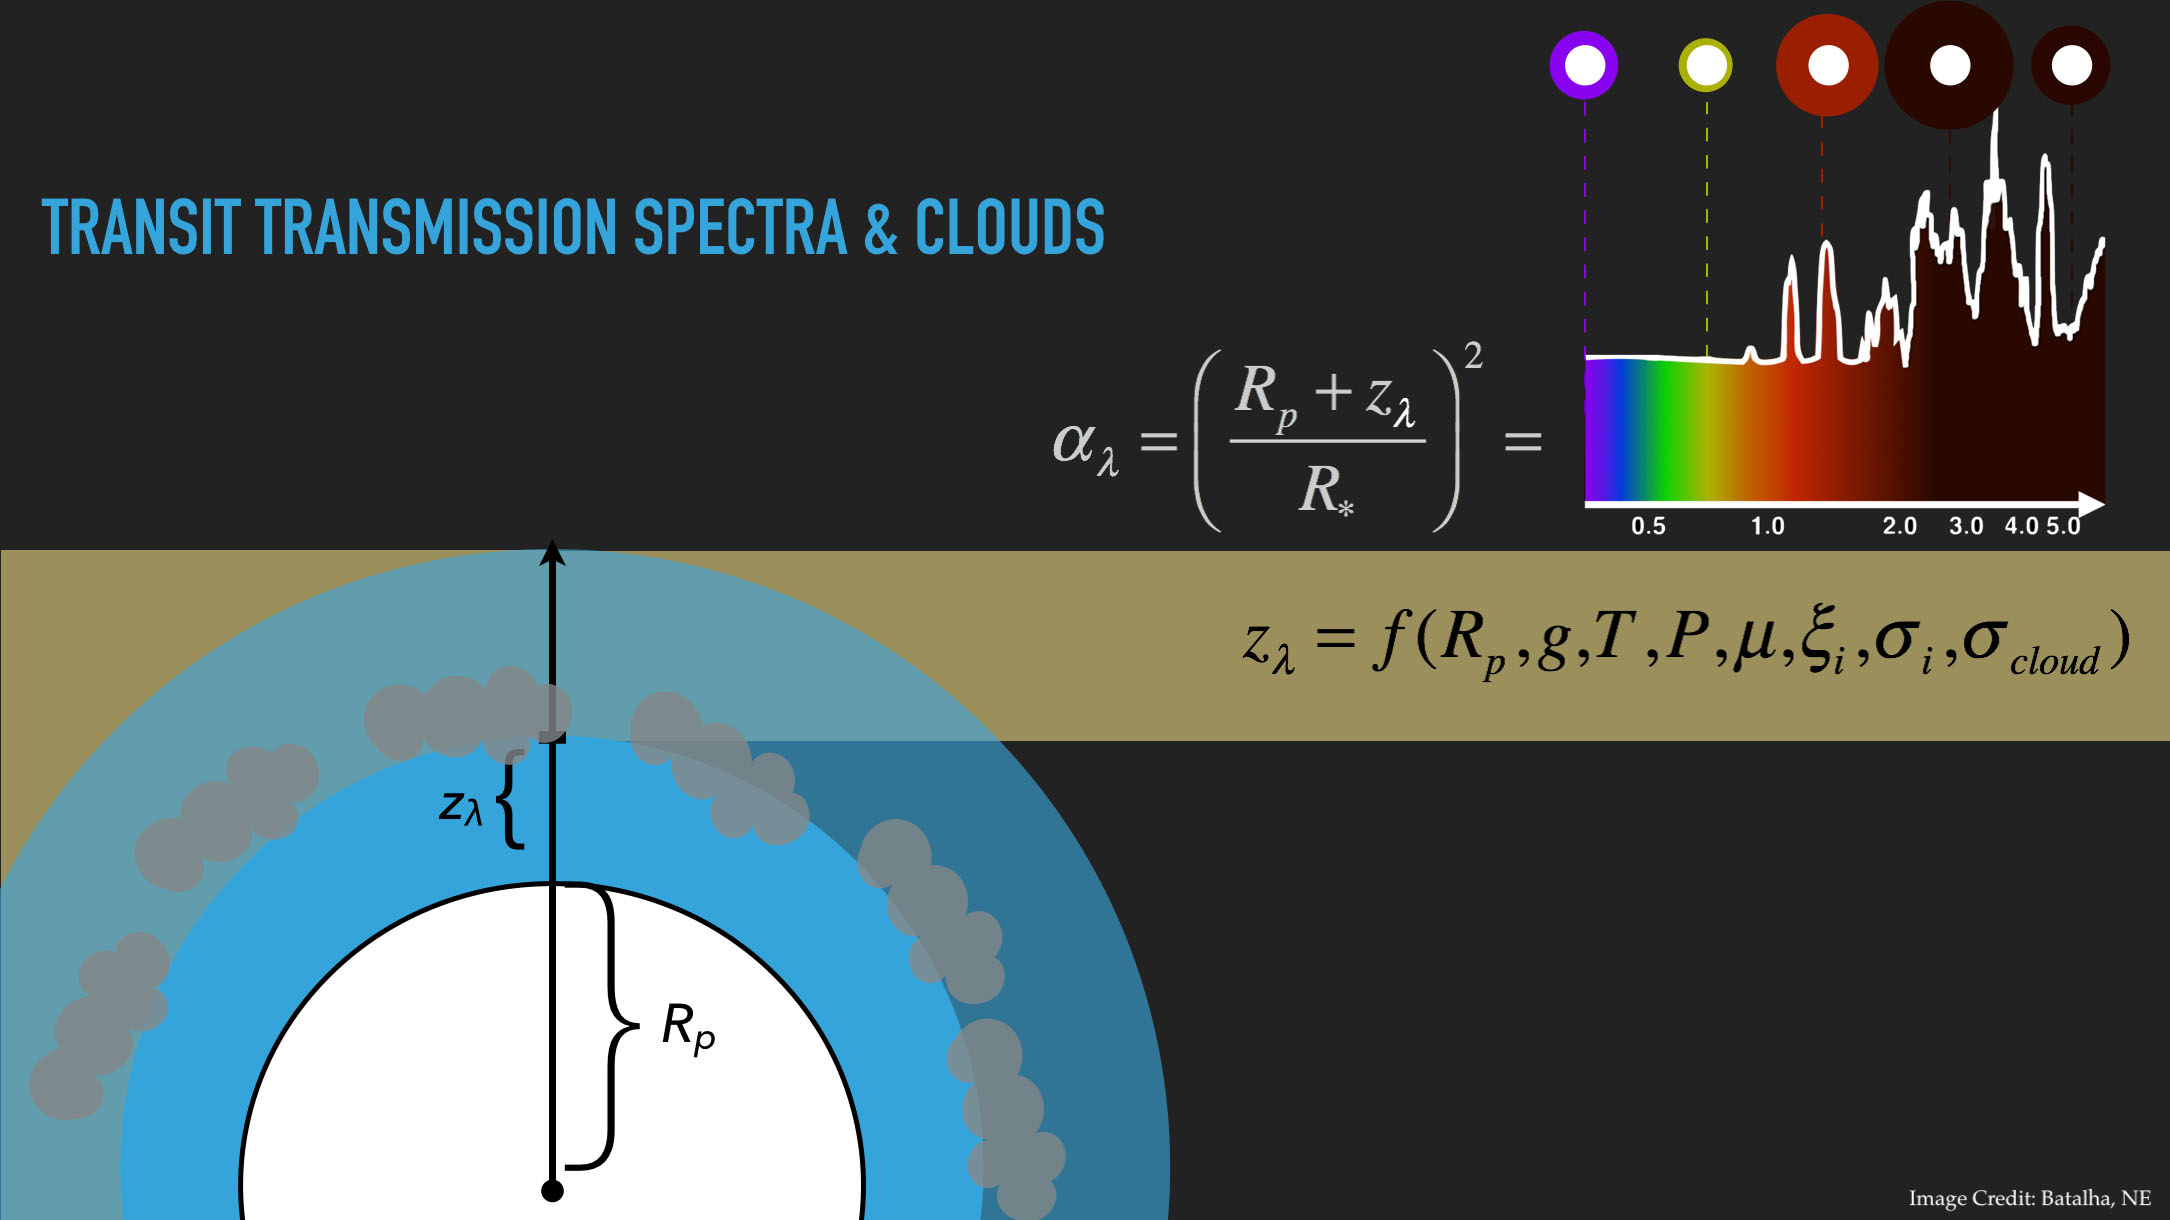 transmission spectra resolve a planet's atmosphere